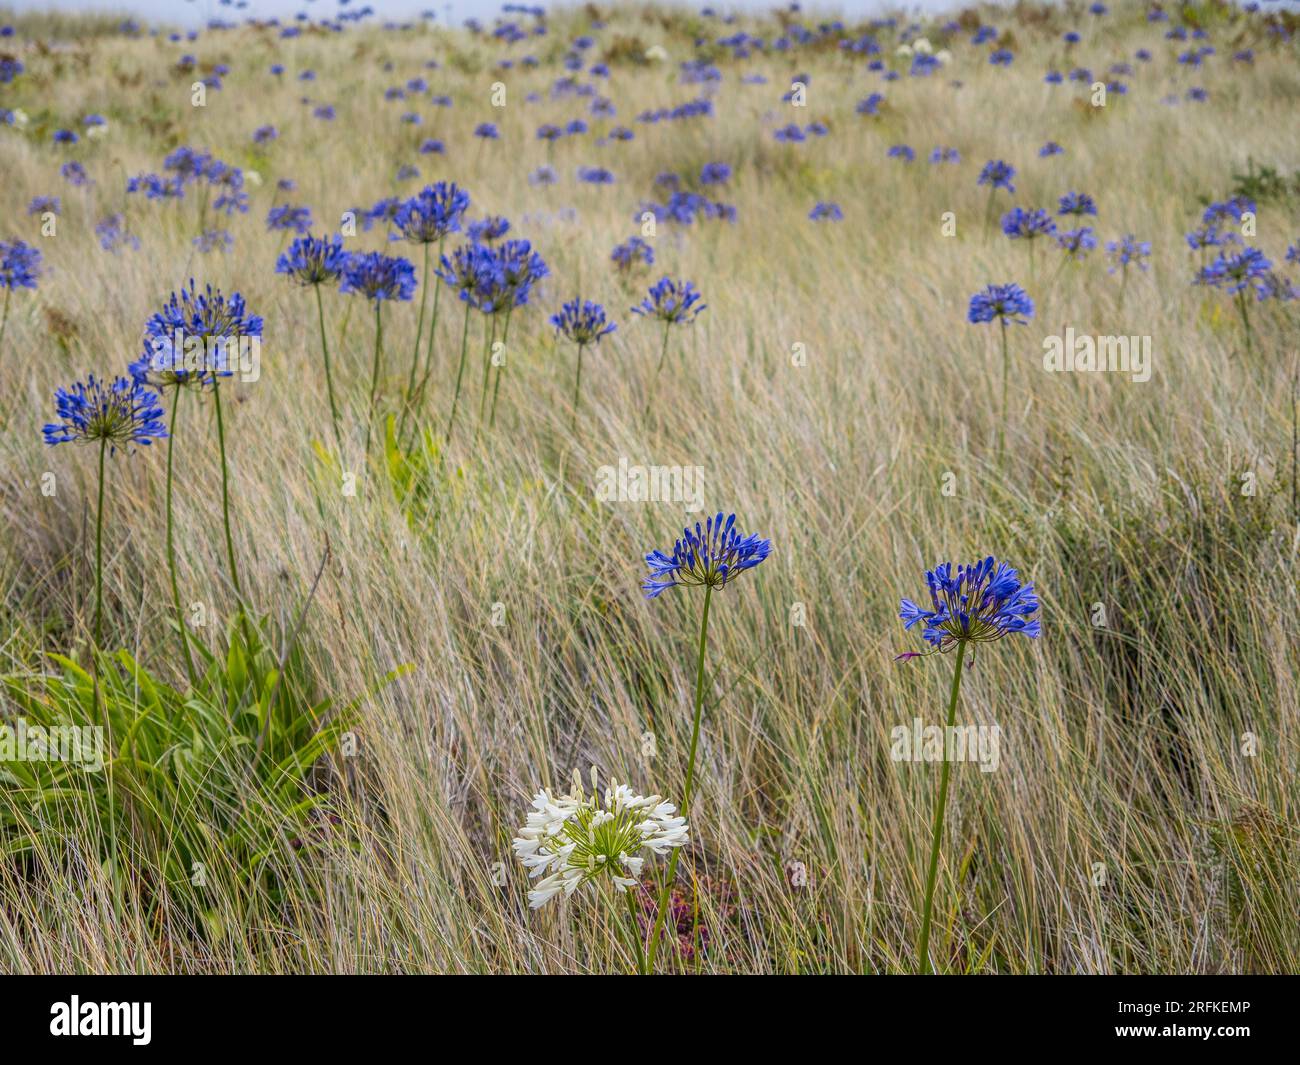 Agapanthus Umbellatus, Lilly of The Nile, Growing on Sand Dunes, nr Corn Near Road, Tresco, Isles of Scilly, Cornwall, England, UK, GB. Stock Photo